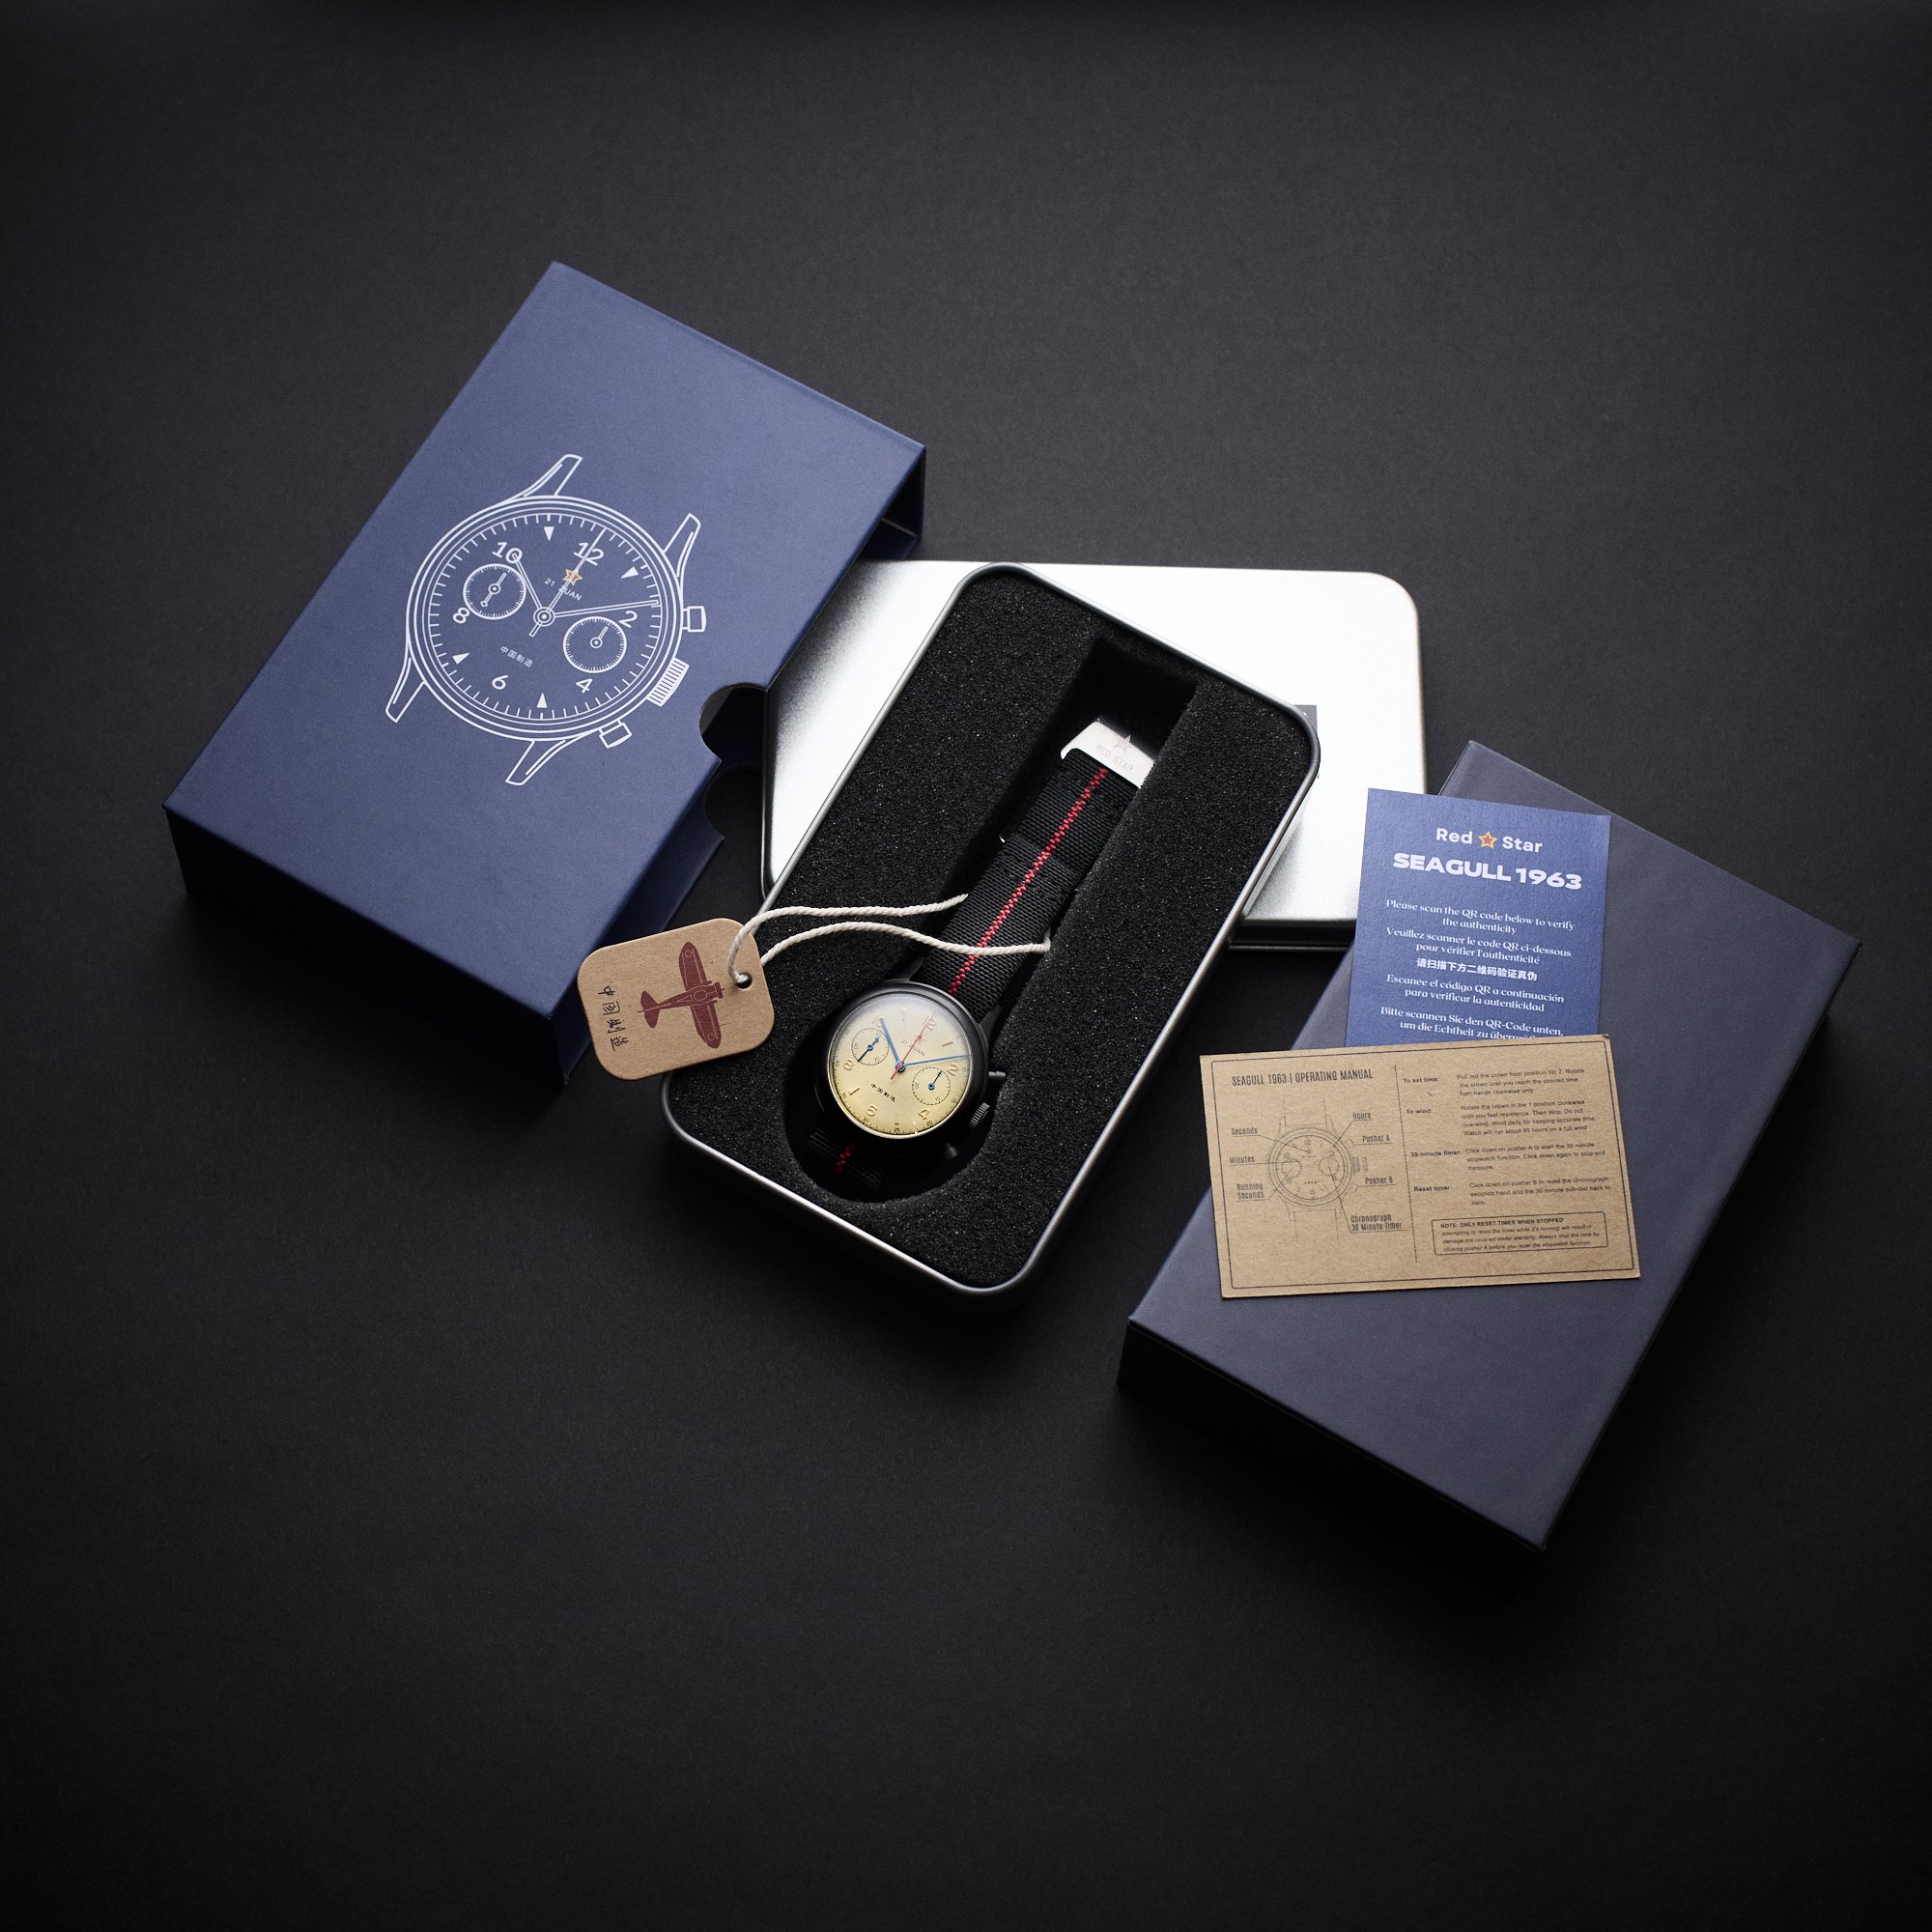 Seagull 1963 38mm black edition Sapphire packaging